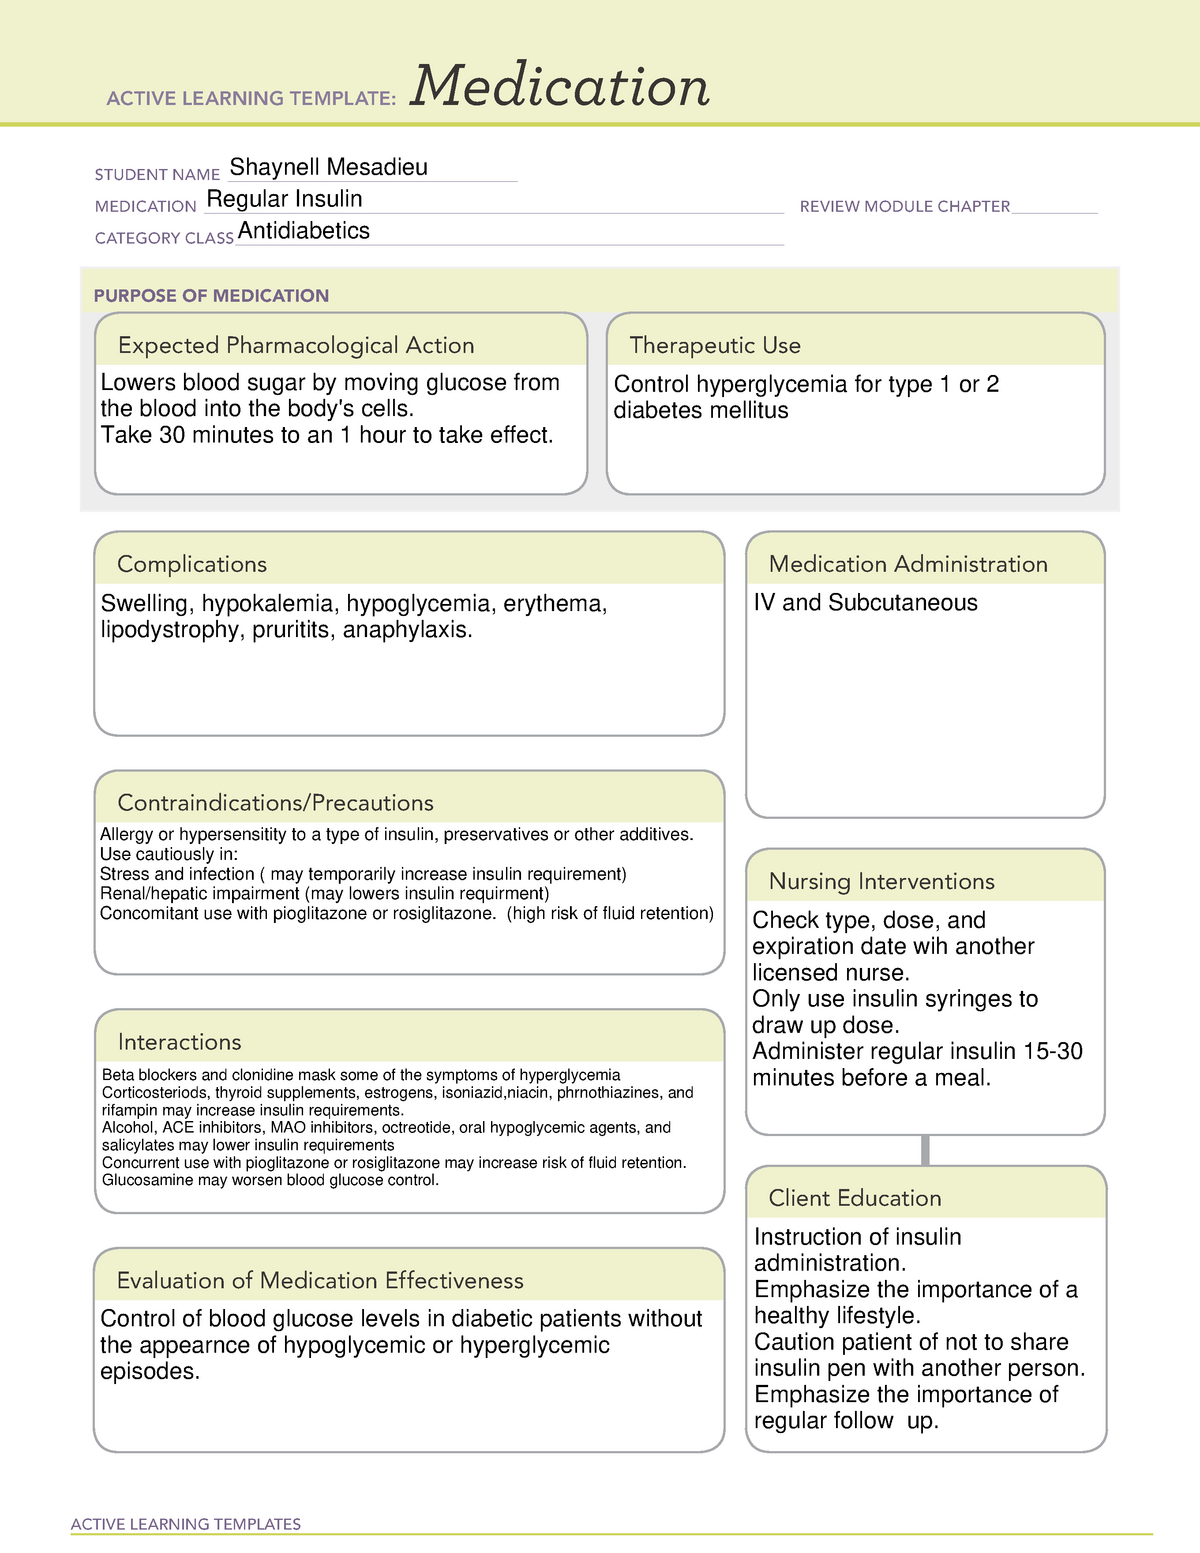 ATI learning template Regular insulin ACTIVE LEARNING TEMPLATES